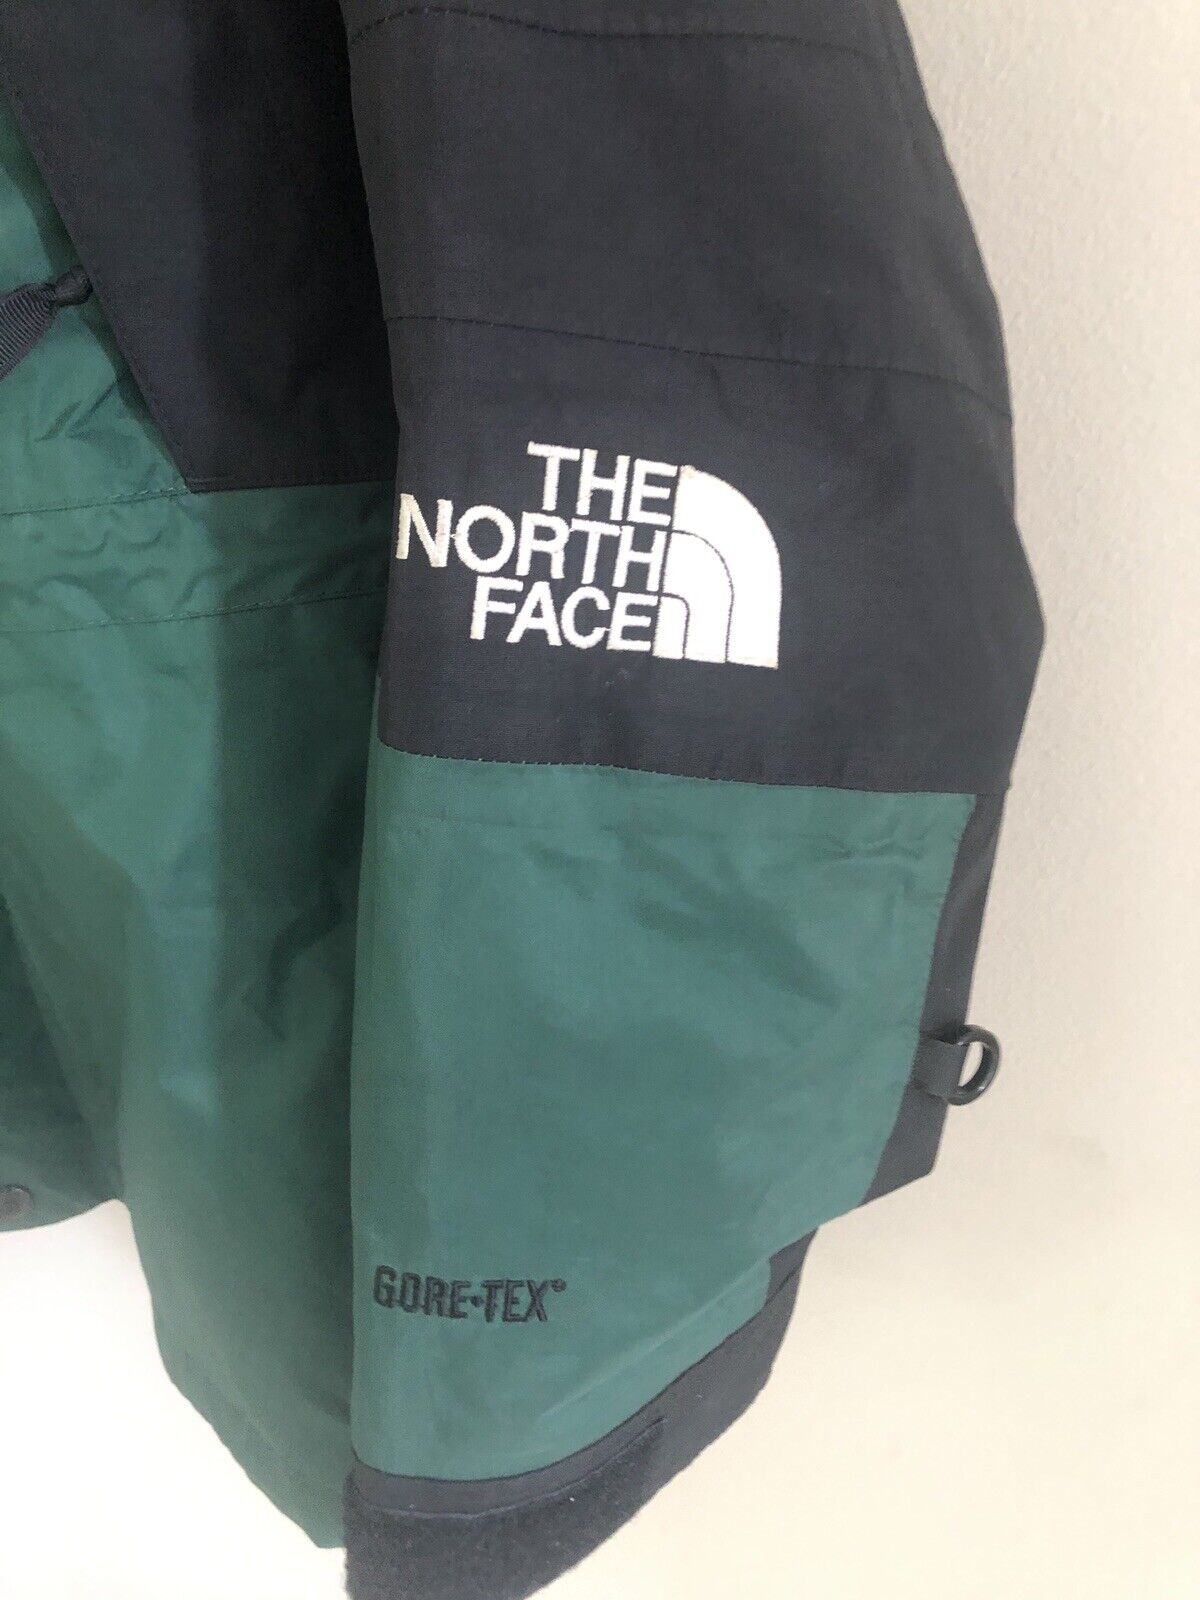 New Vtg The North Face Gore-tex Mountain Light Jacket Green Black 